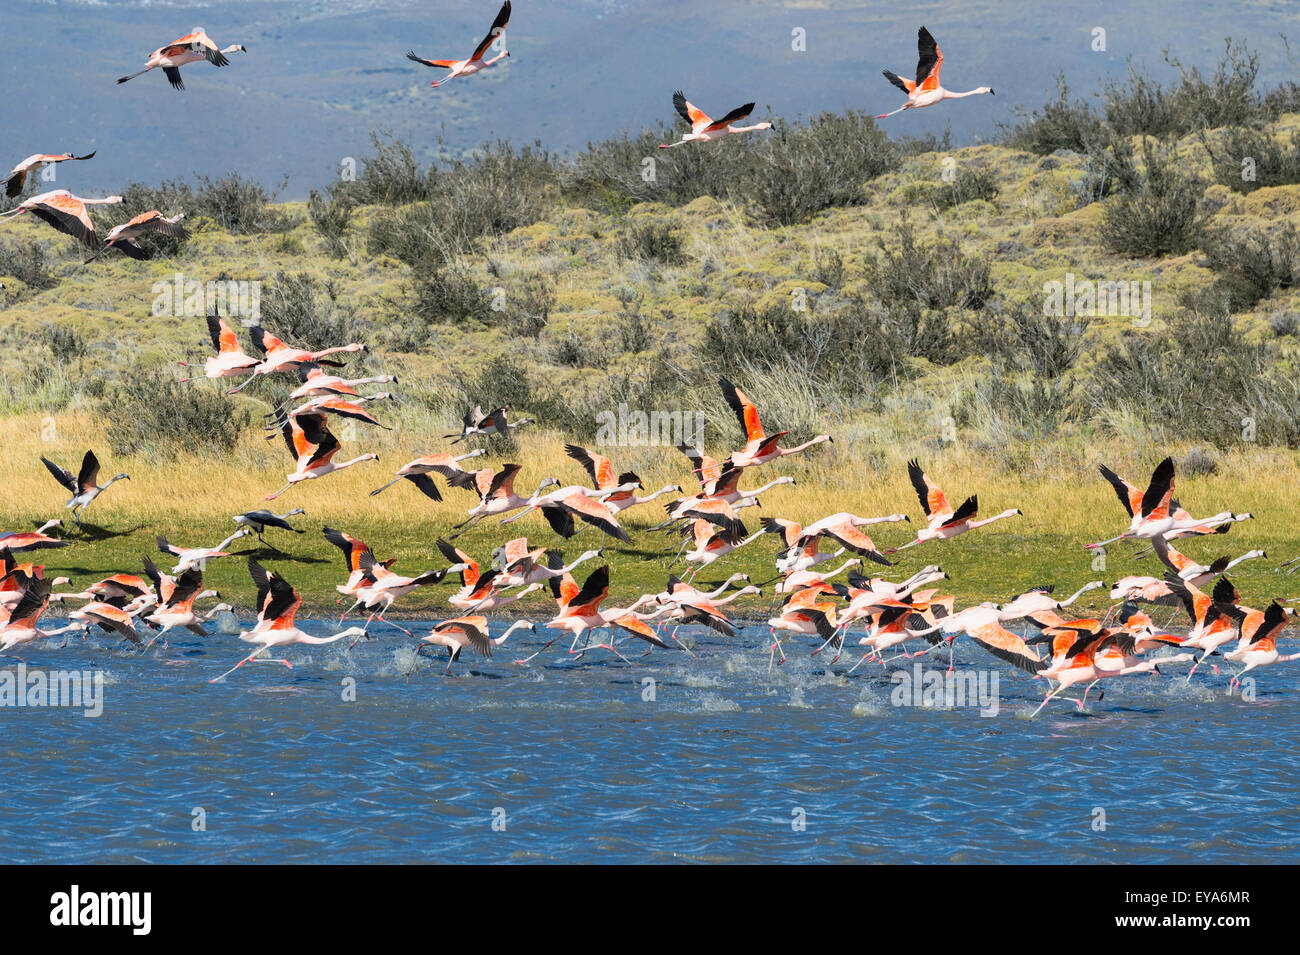 Chilean Flamingos taking off (Phoenicopterus chilensis), Torres del Paine National Park, Chilean Patagonia, Chile Stock Photo